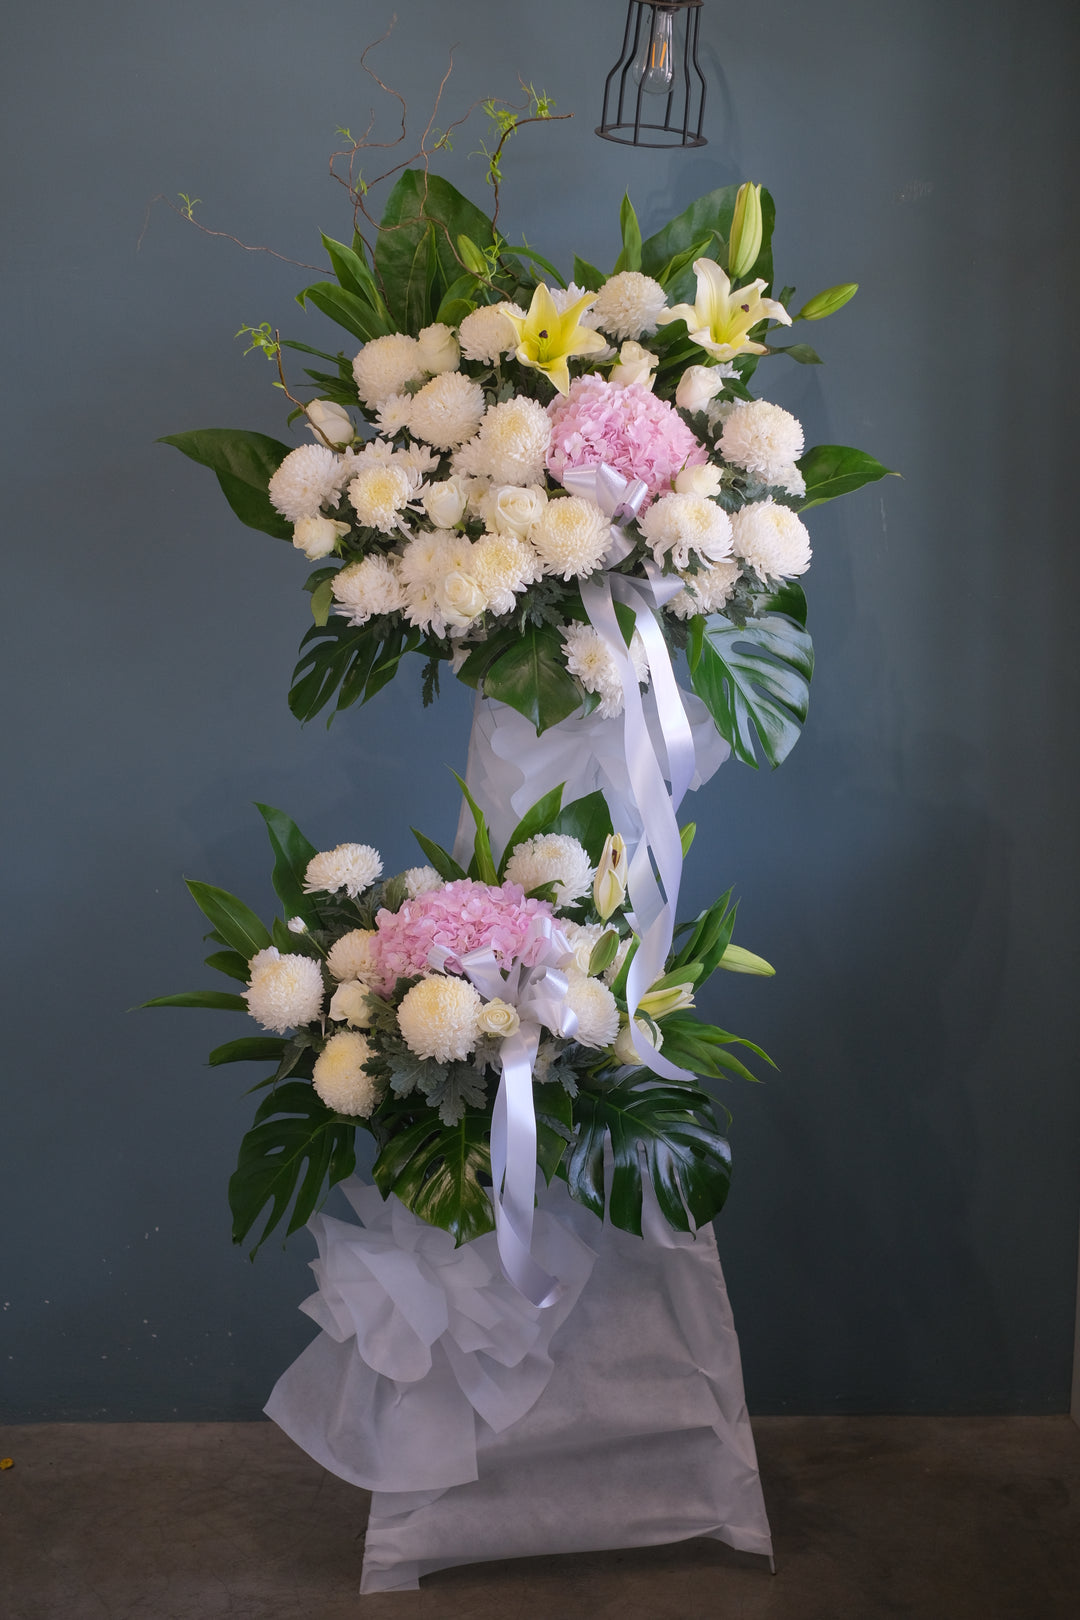 customised flower bouquet featuring chrysanthemum, roses, hydrangeas, and many more seasonal flowers